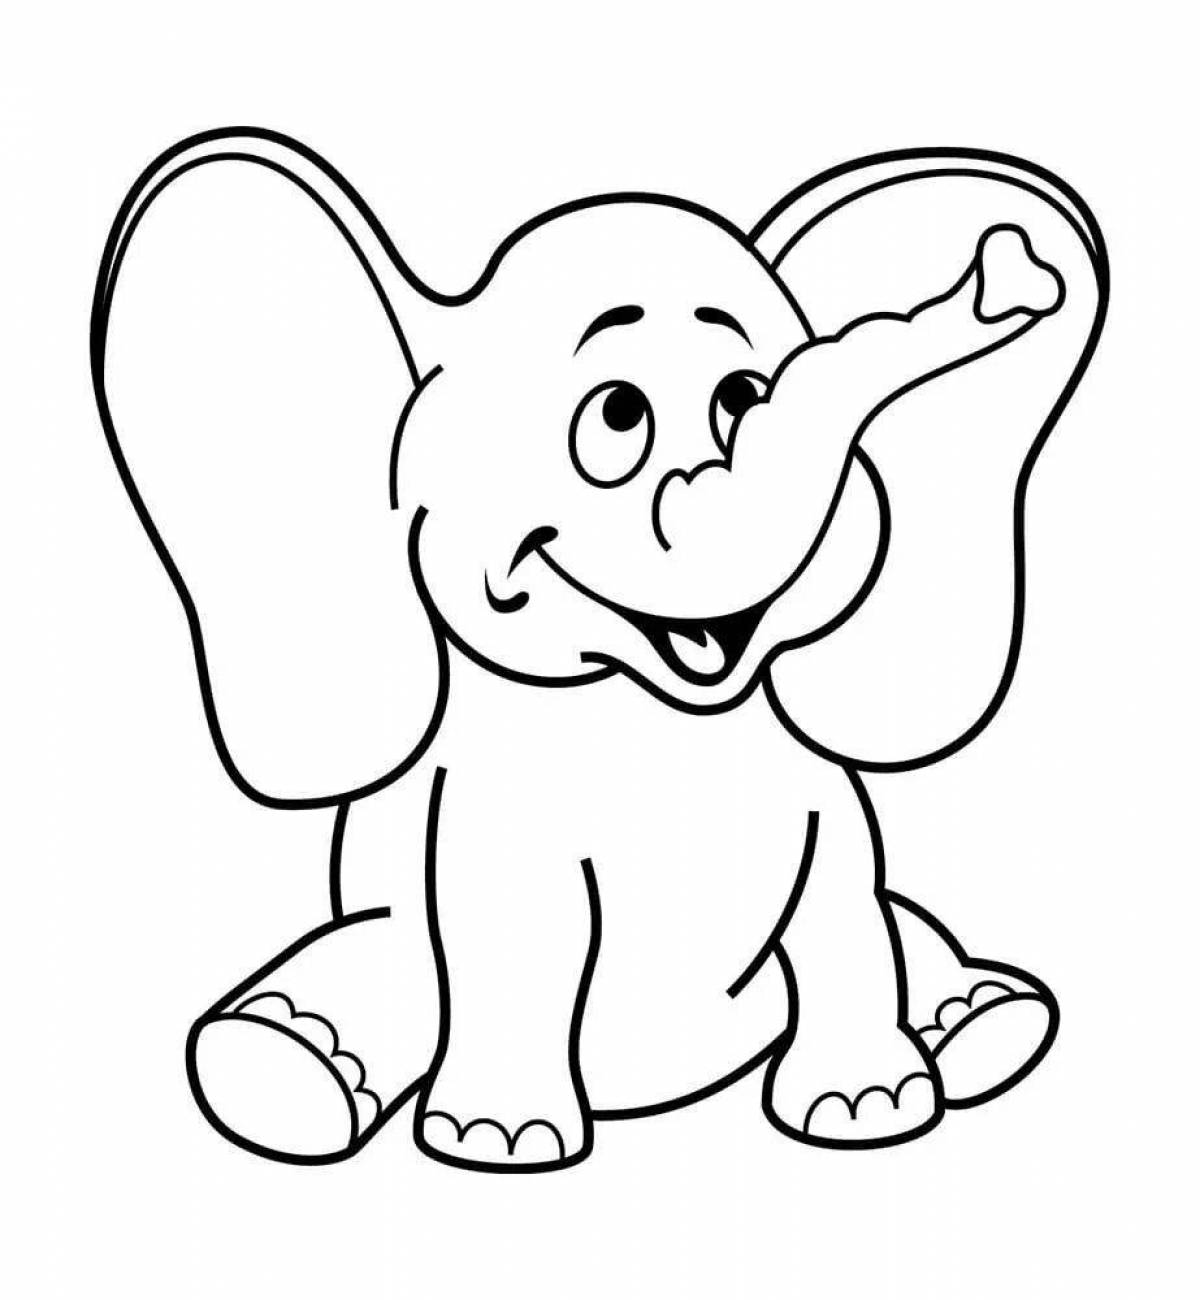 Outstanding elephant coloring book for kids